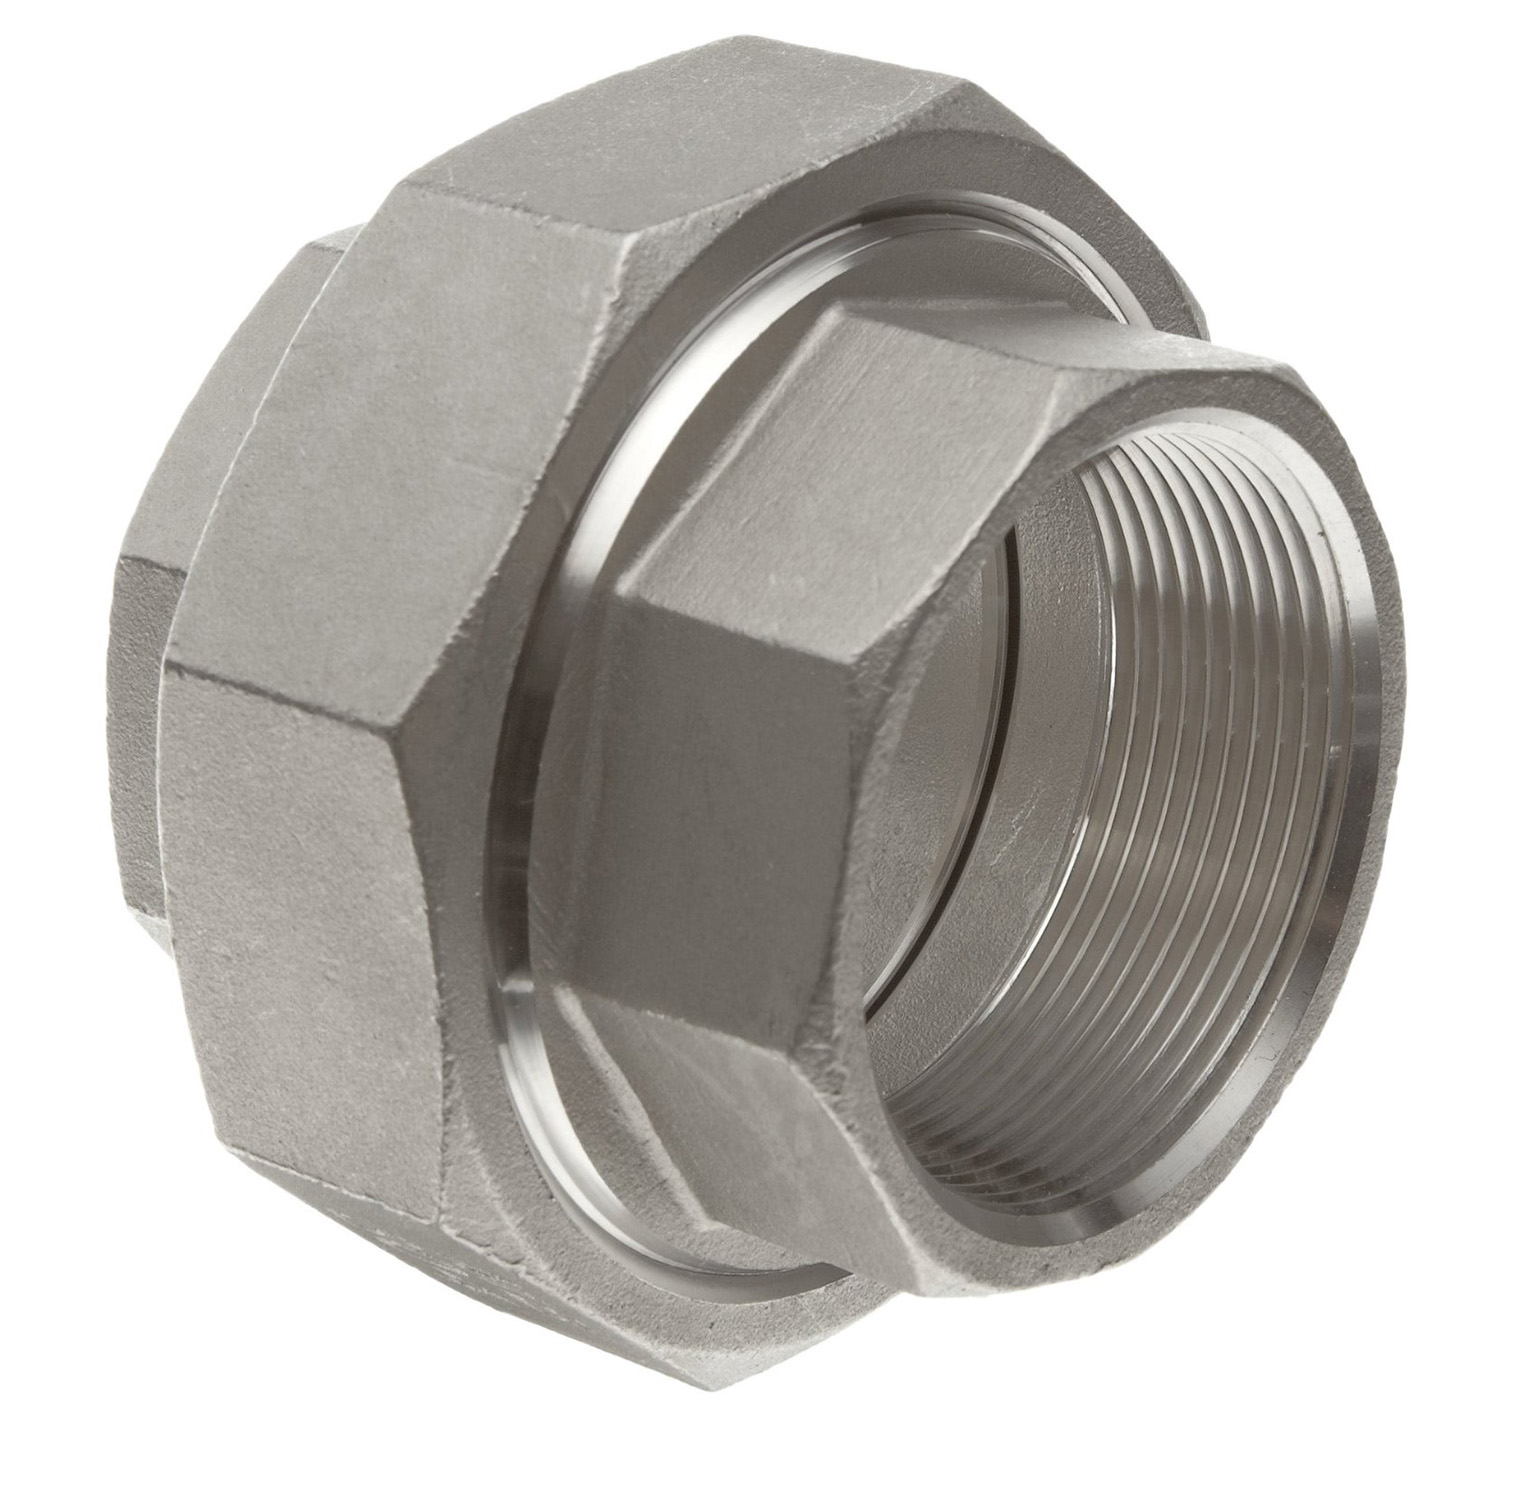 3/8” BSPT Female Threaded Union Stainless Steel 304 Cast Pipe Fitting Class 150